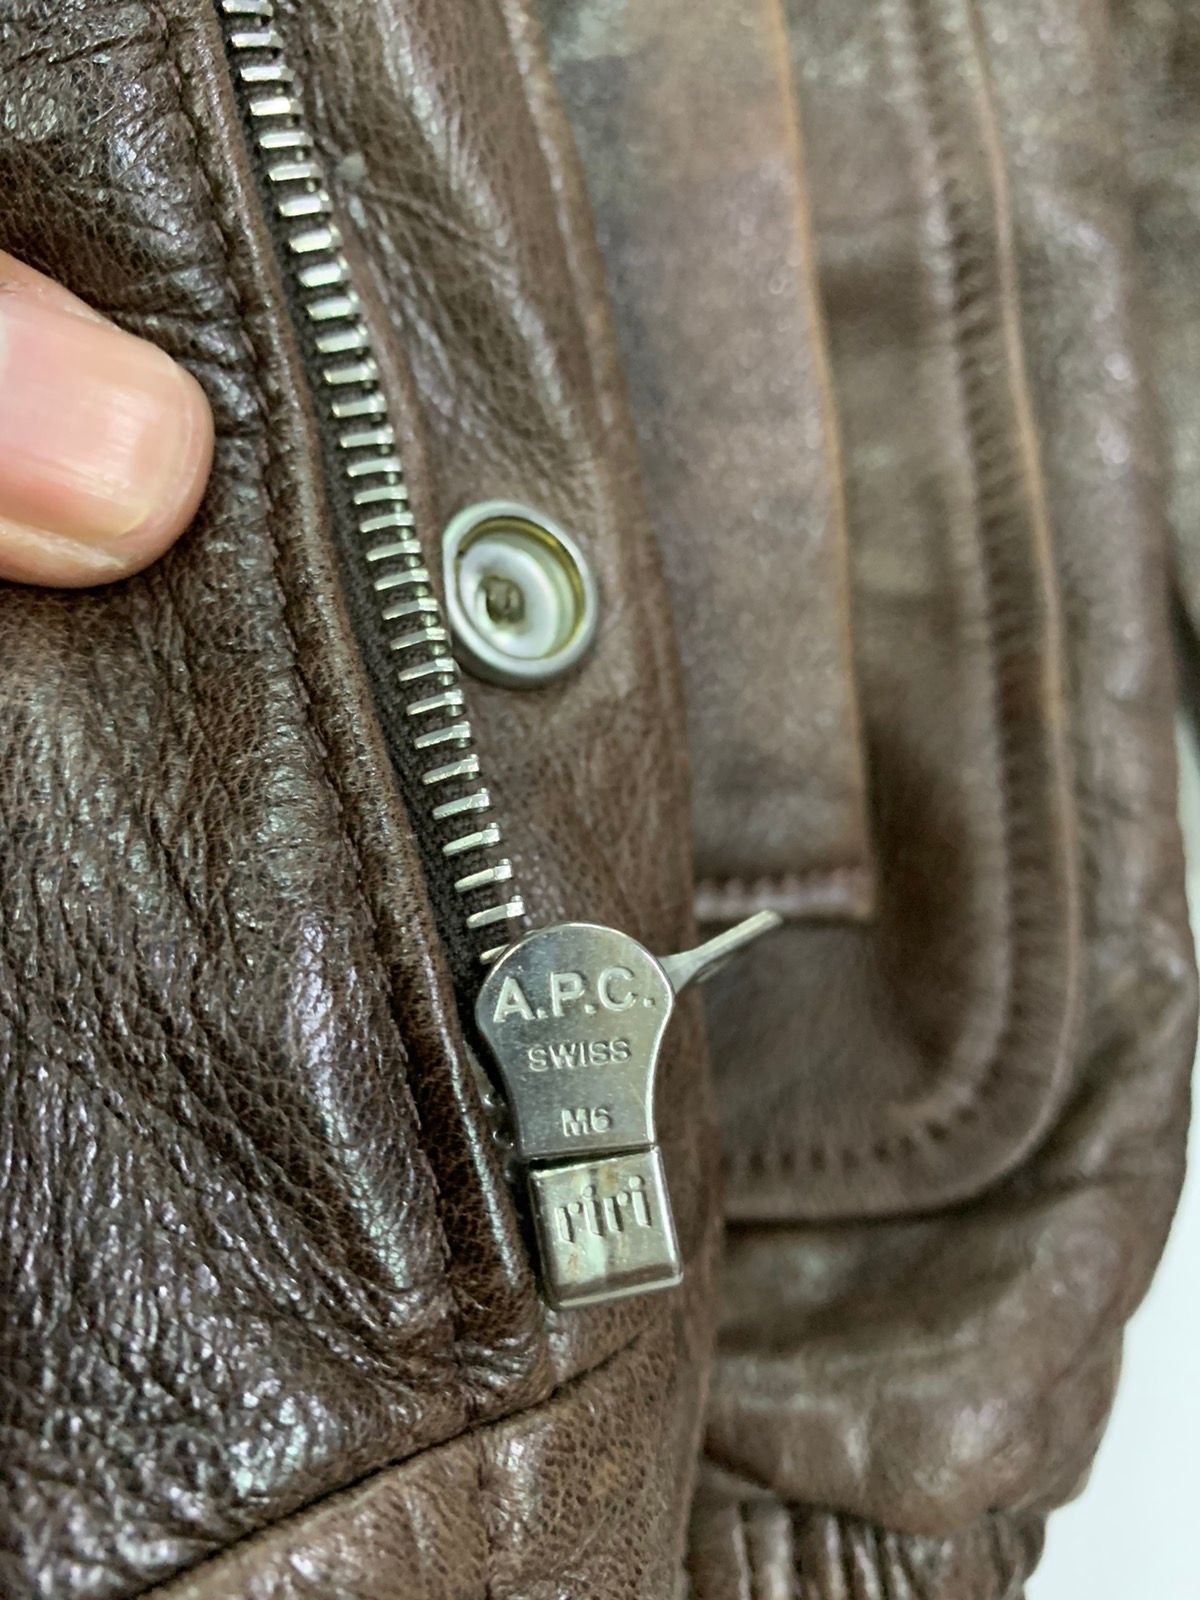 🔥RARE A.P.C LEATHER JACKETS BROWN - 11